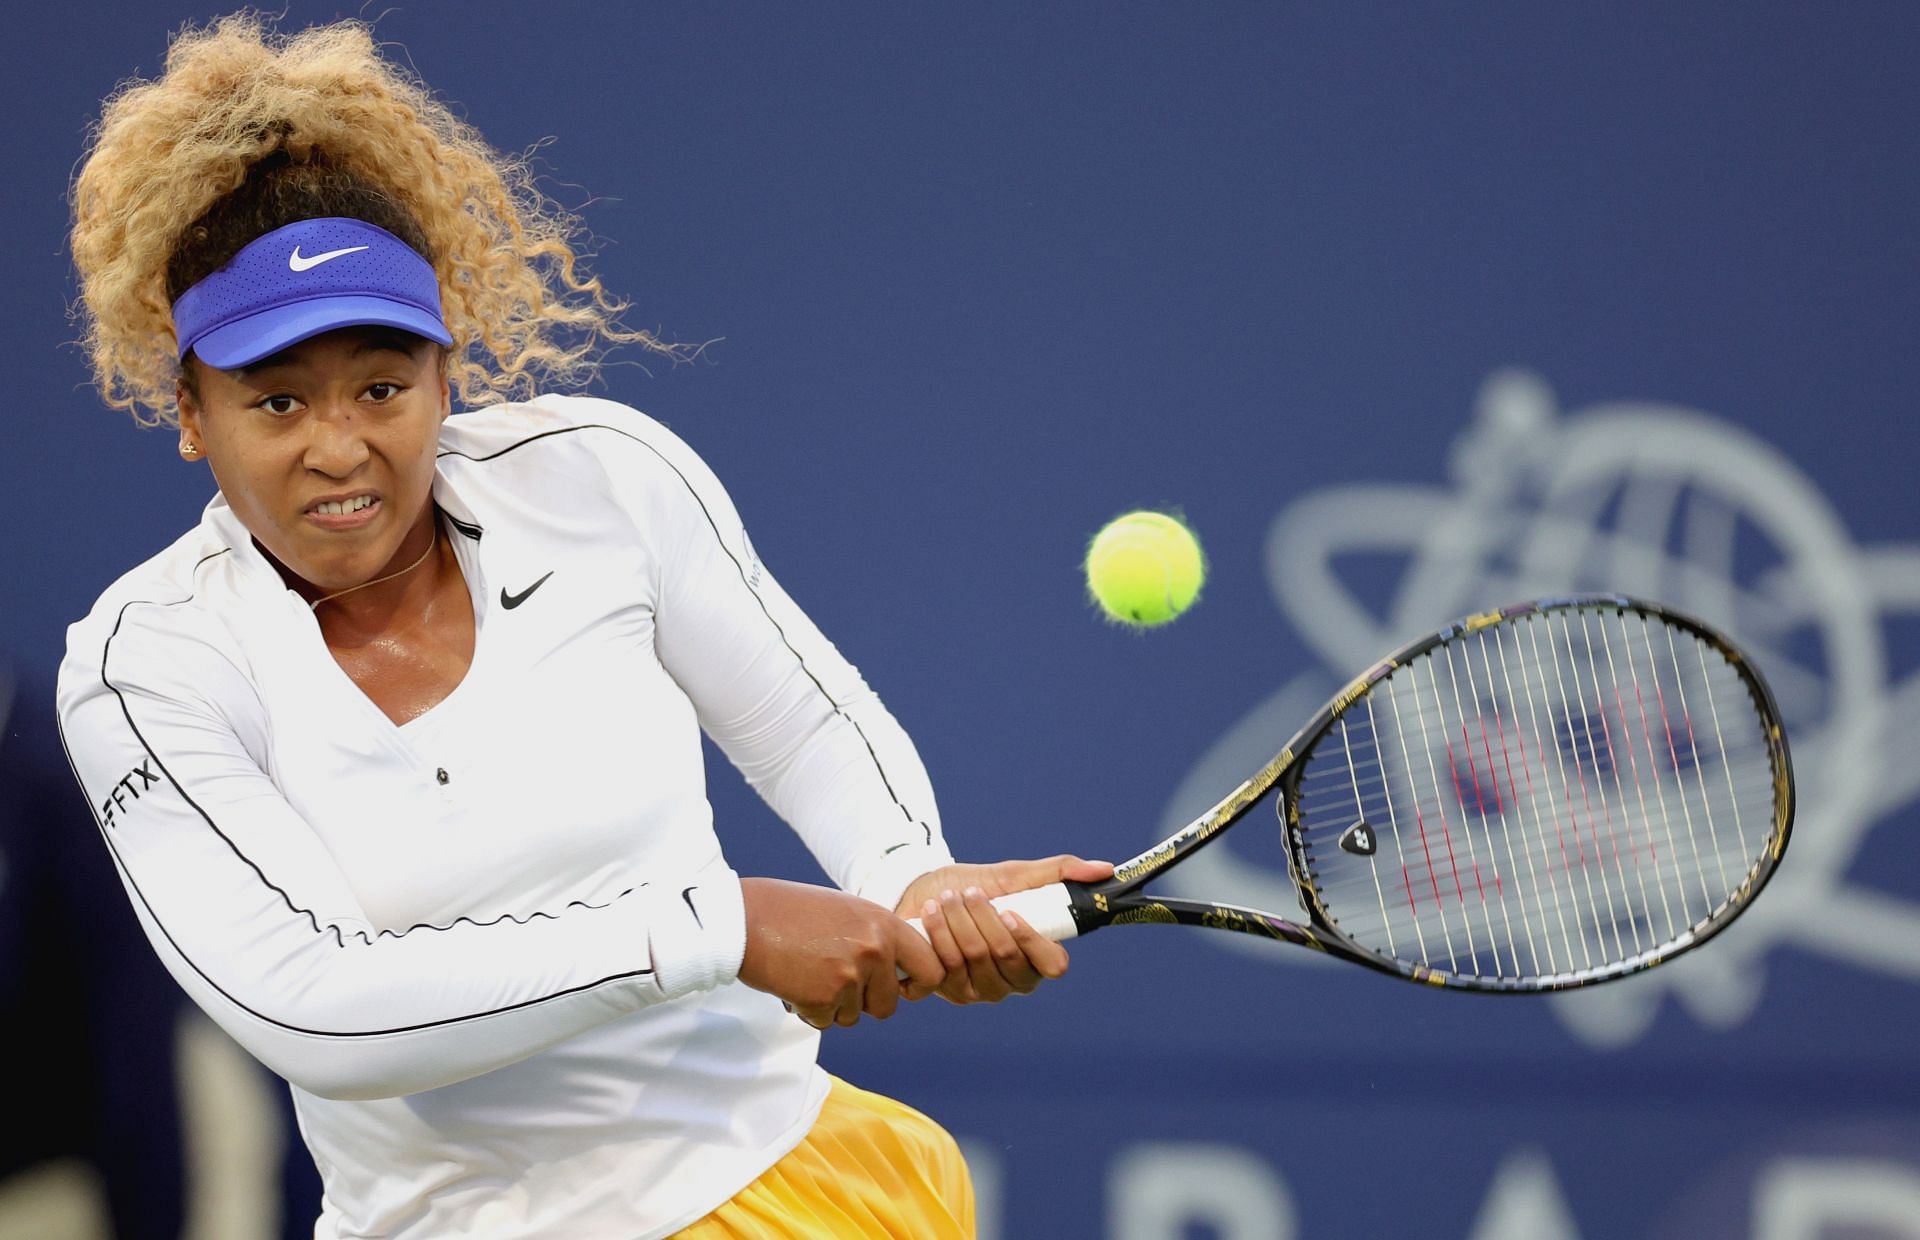 Naomi Osaka is yet to win a title in 2022